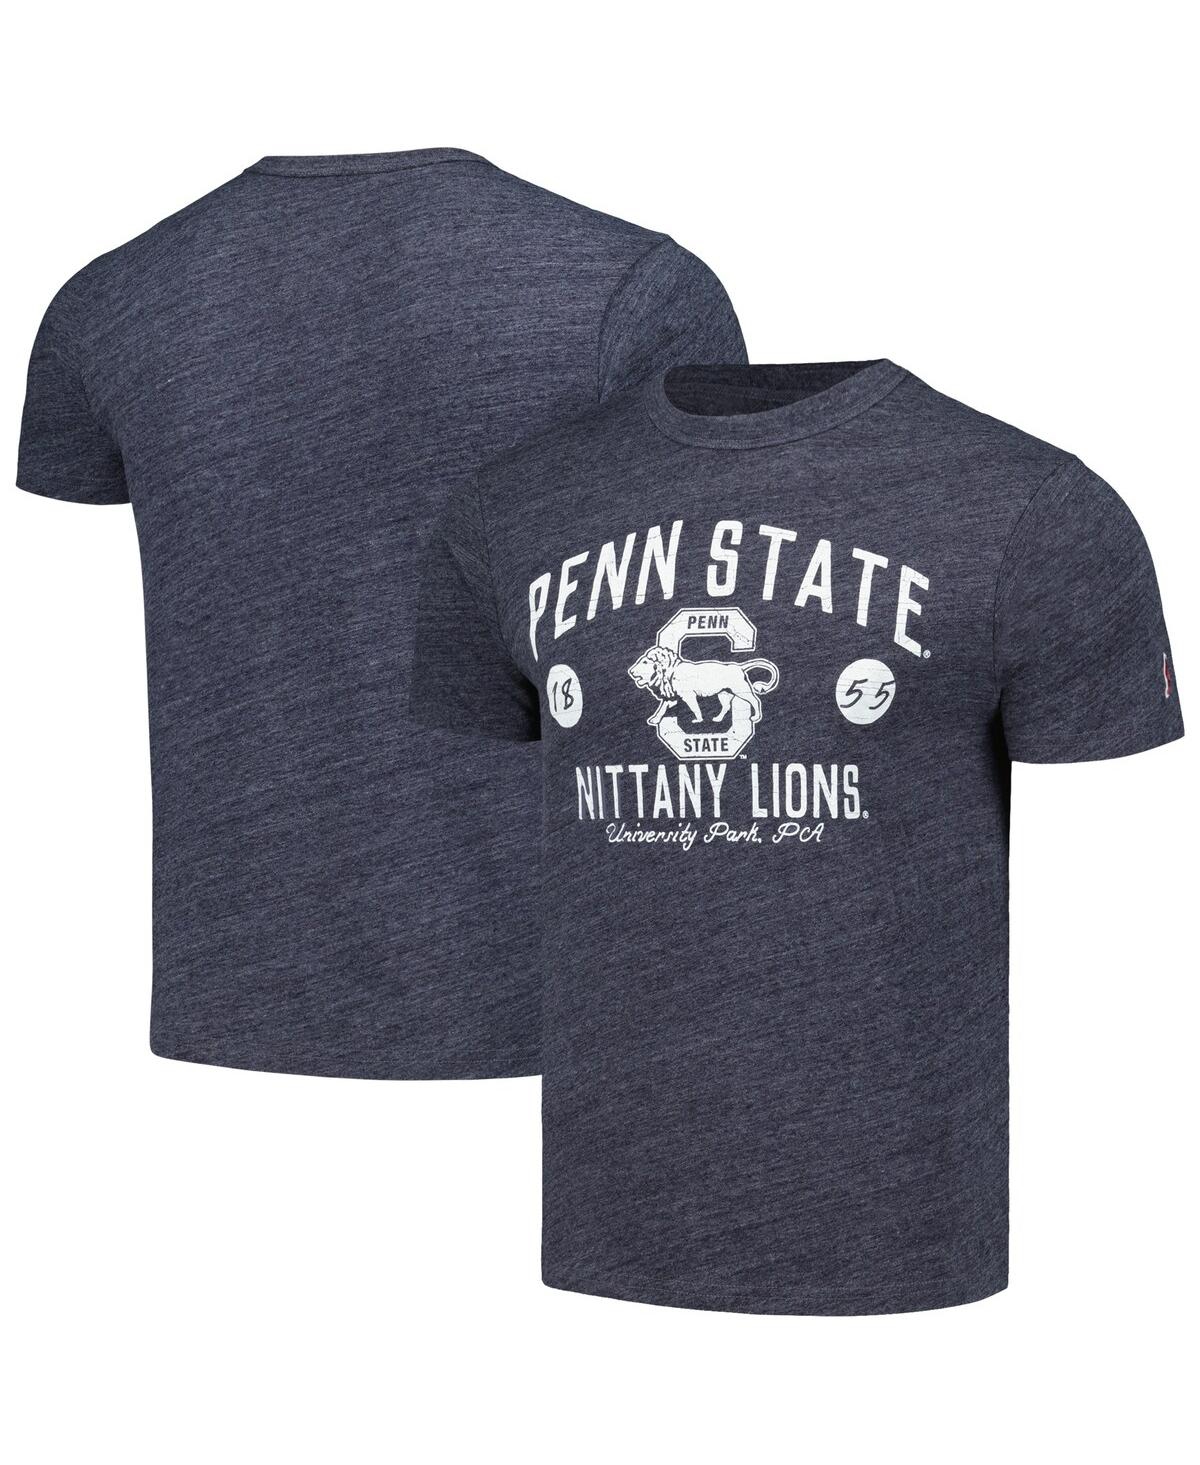 League Collegiate Wear Men's  Heather Navy Distressed Penn State Nittany Lions Bendy Arch Victory Fal